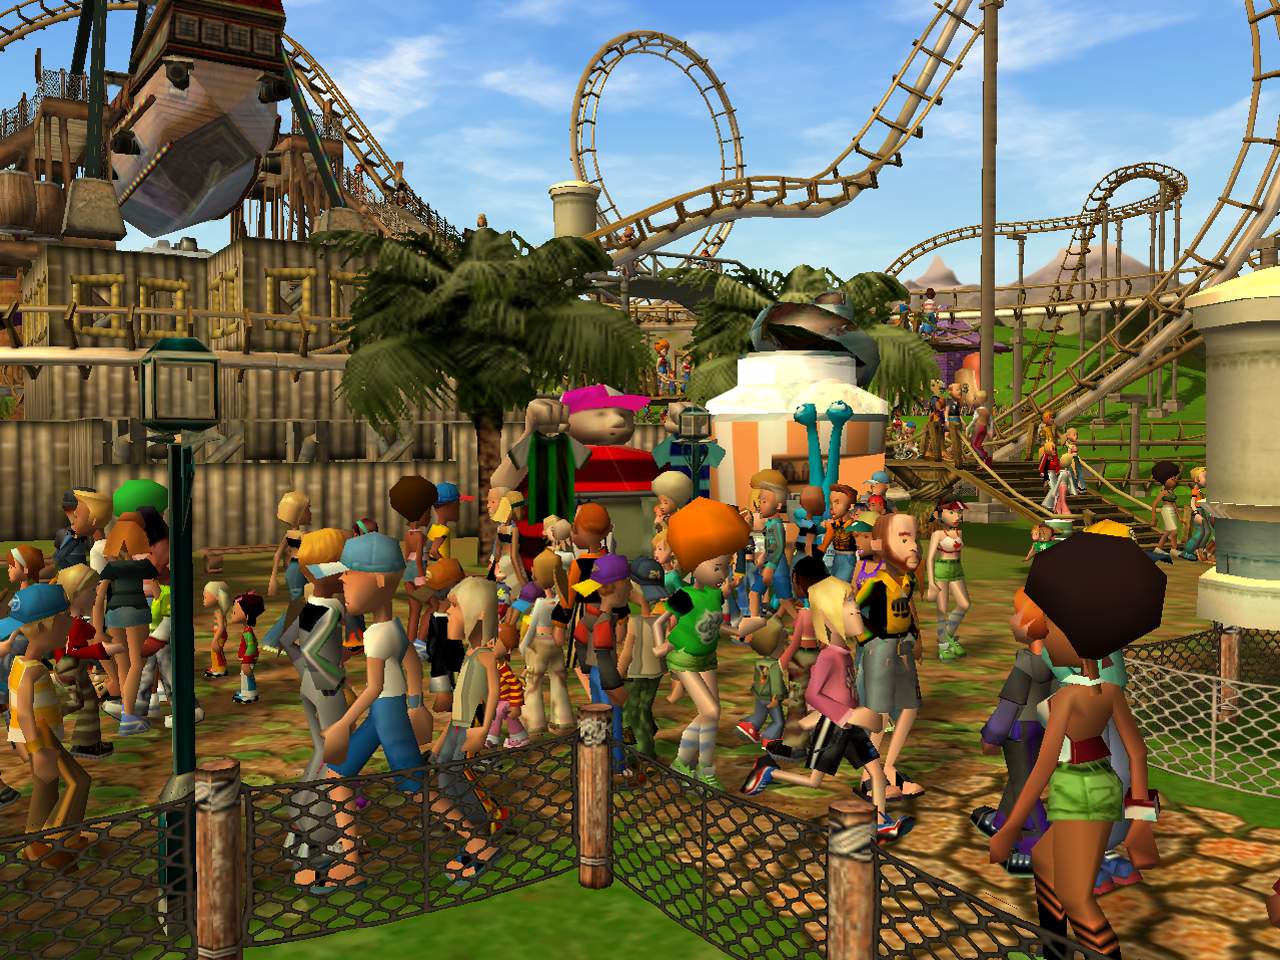 Game park is. Rollercoaster Tycoon 3. Rollercoaster игра. Rollercoaster Tycoon 3 Скриншоты. Rollercoaster Tycoon 3 с зоопарком.